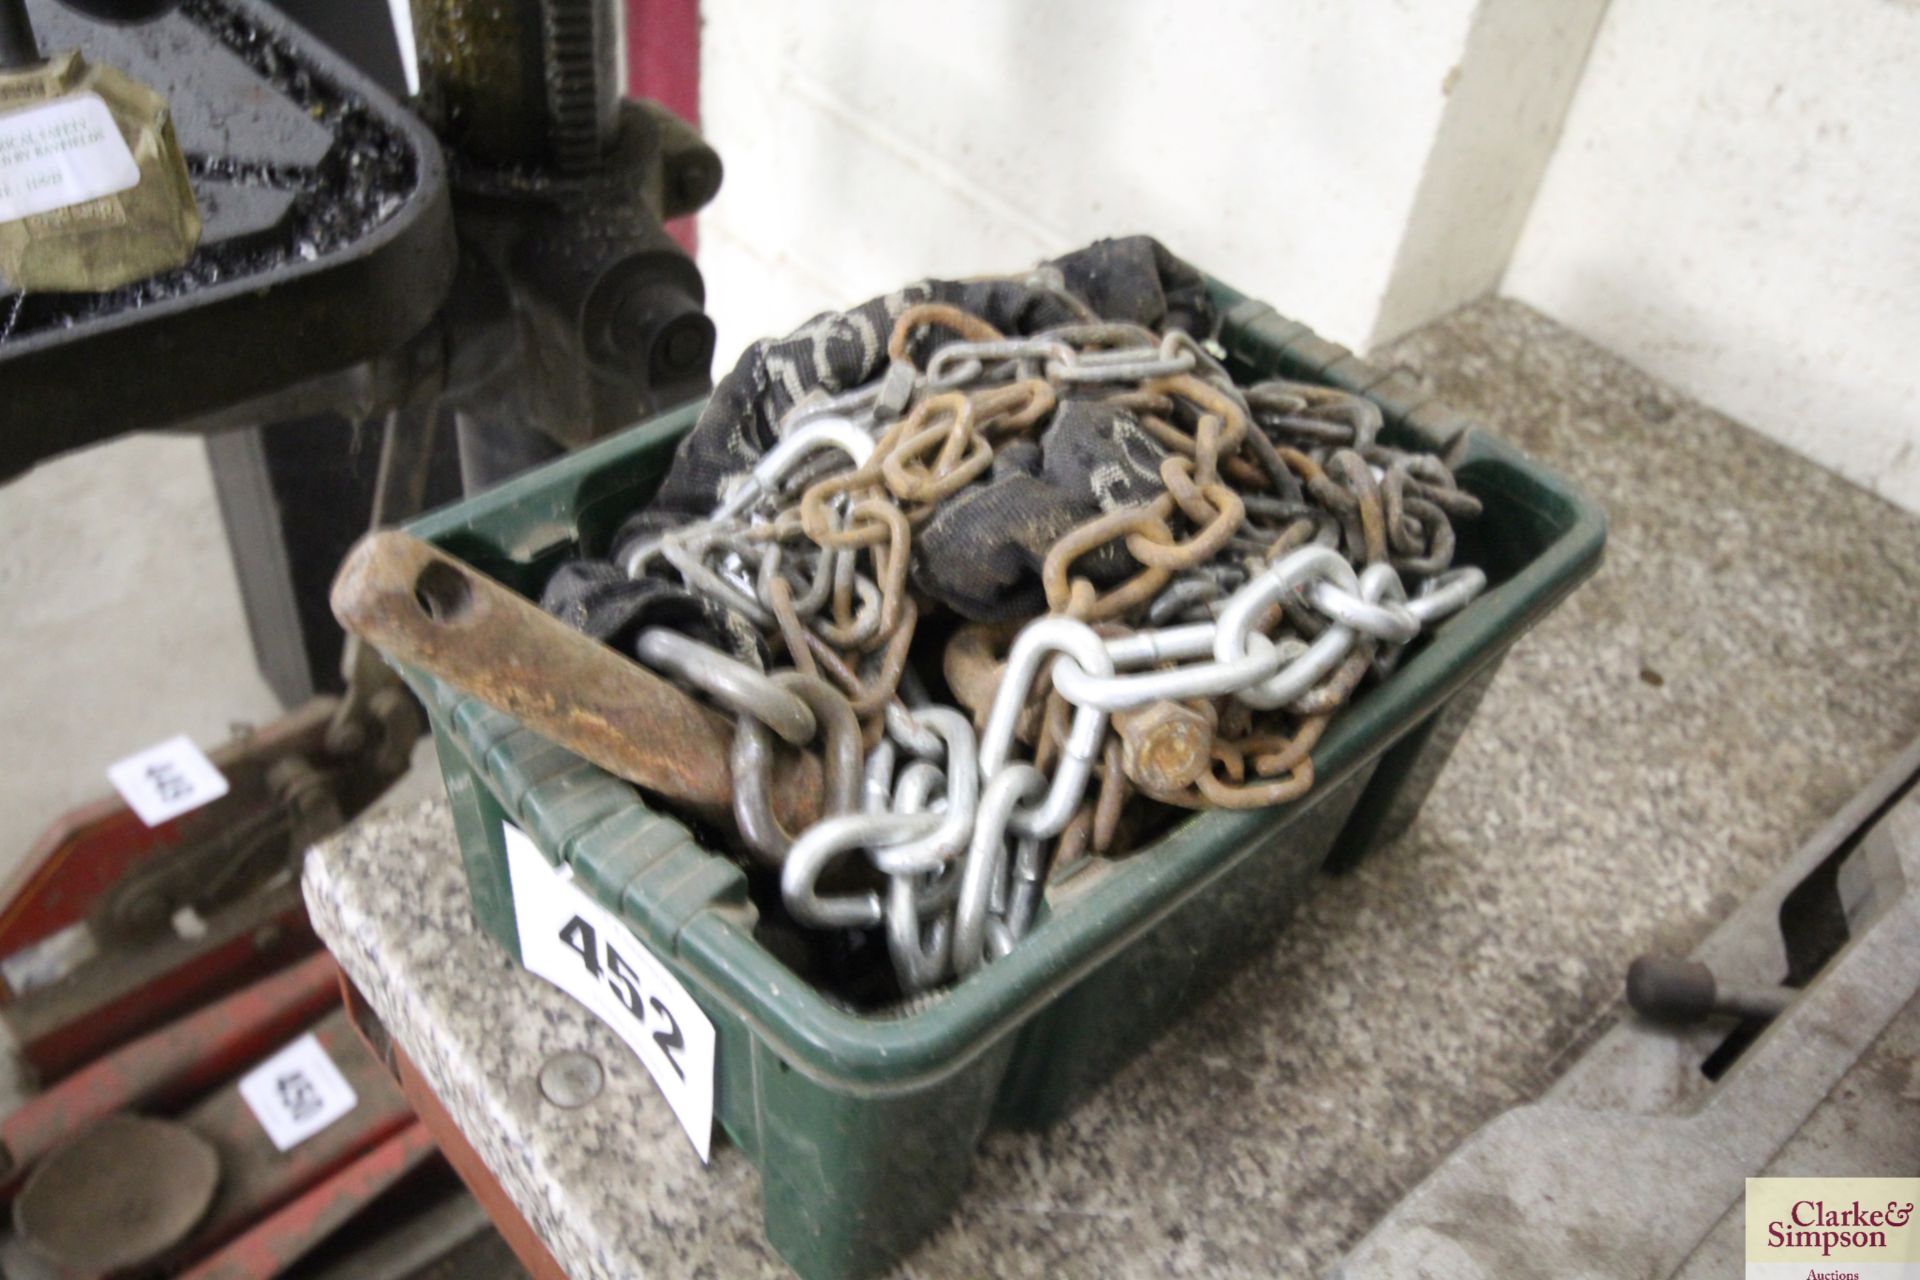 Box of various chain, fasteners etc. For sale due